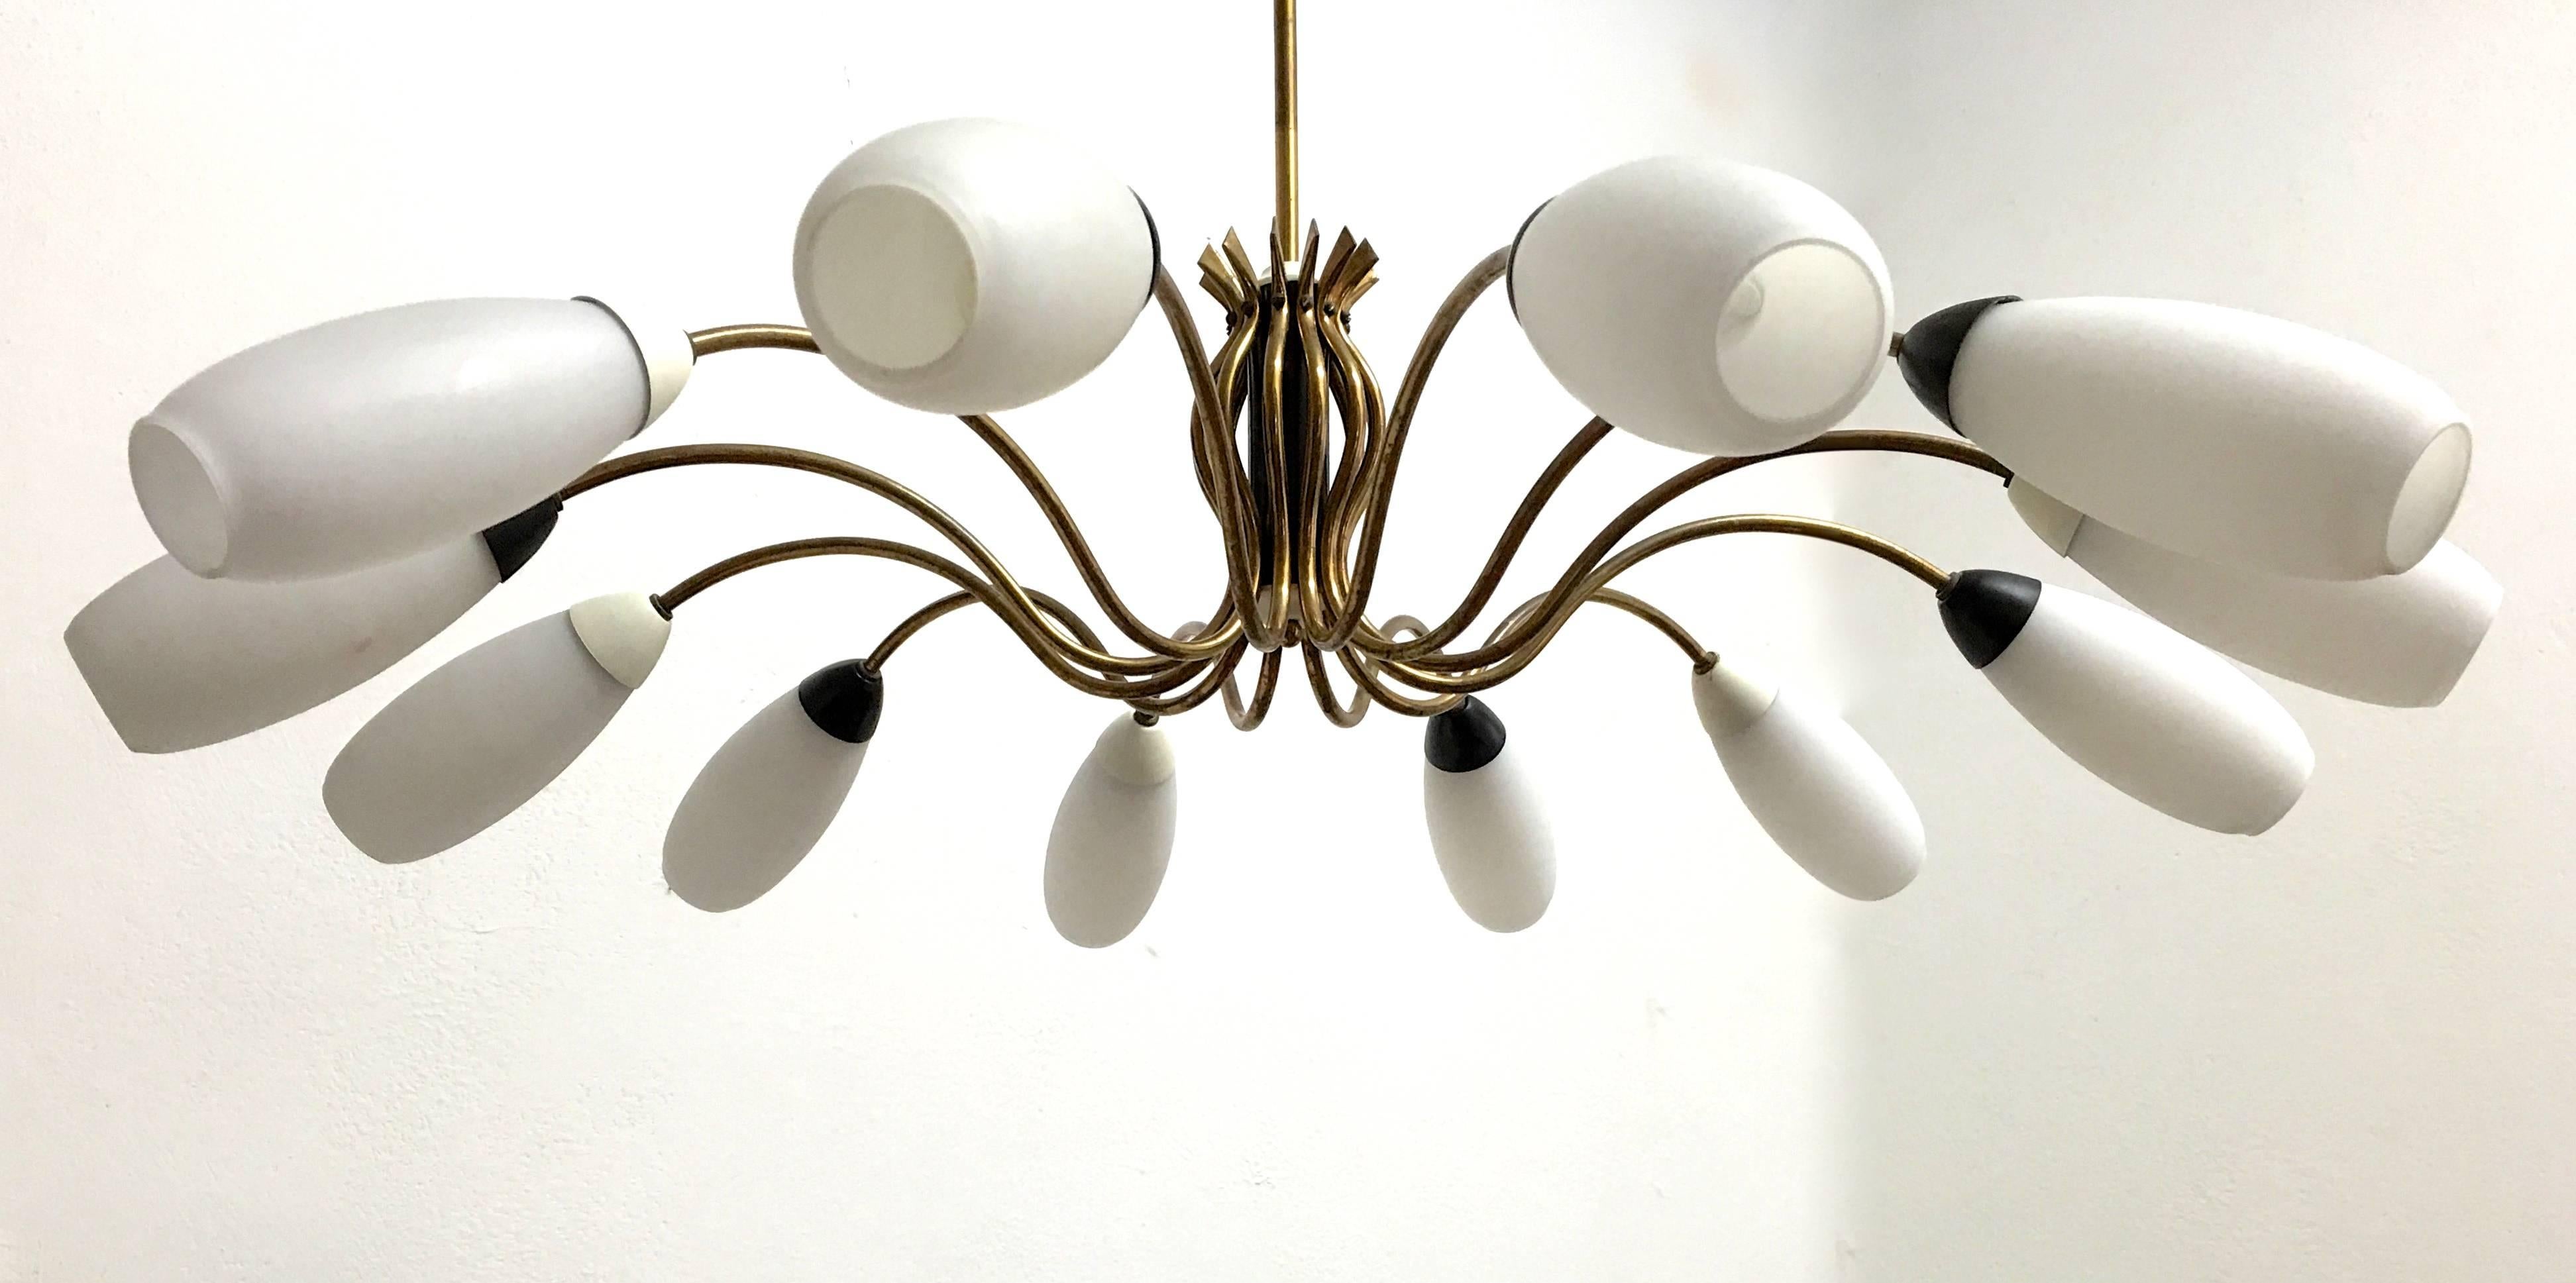 Twelve-arm Italian chandelier with opaline glass shades and black and white light fittings. Brass structure. The height can be suspended.